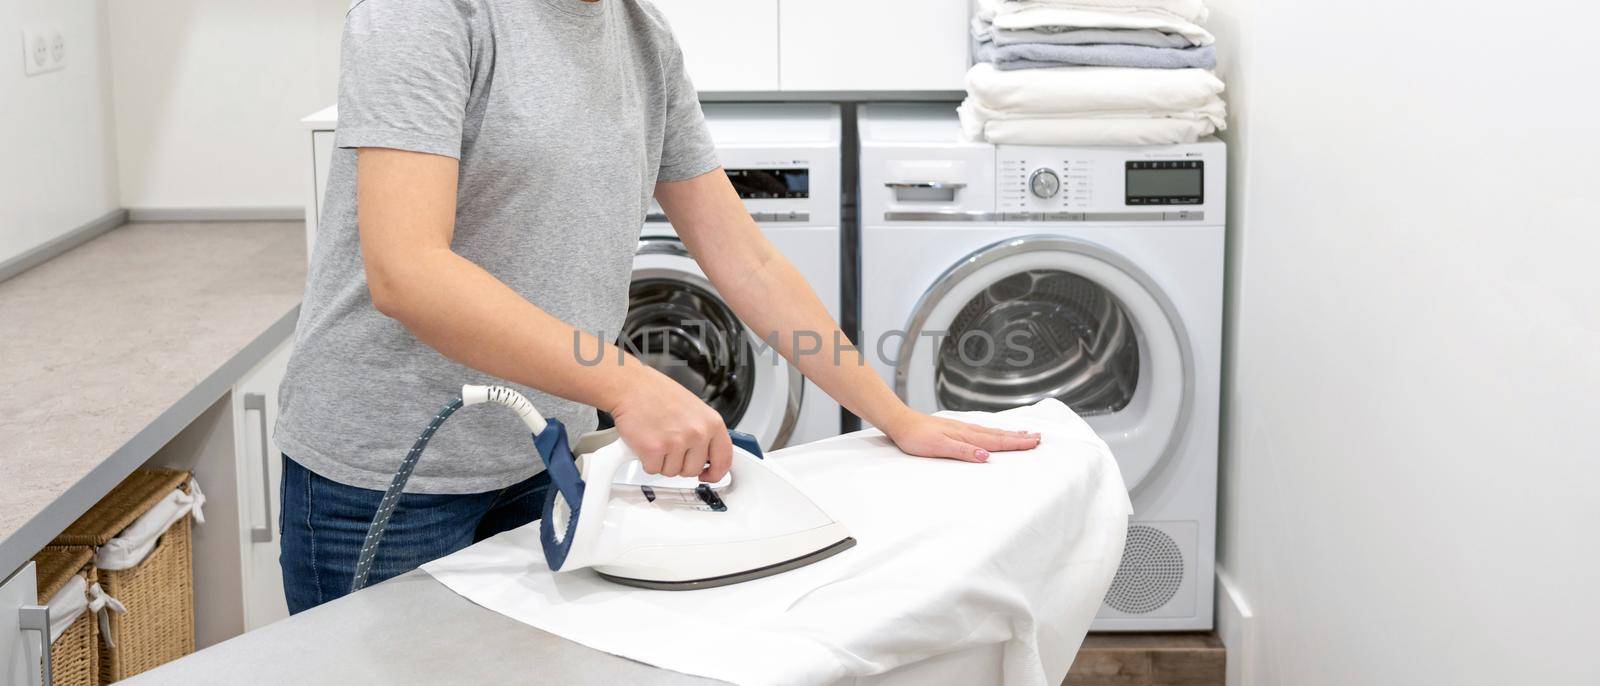 ironing white shirt on board in laundry room with washing machine on background by Mariakray